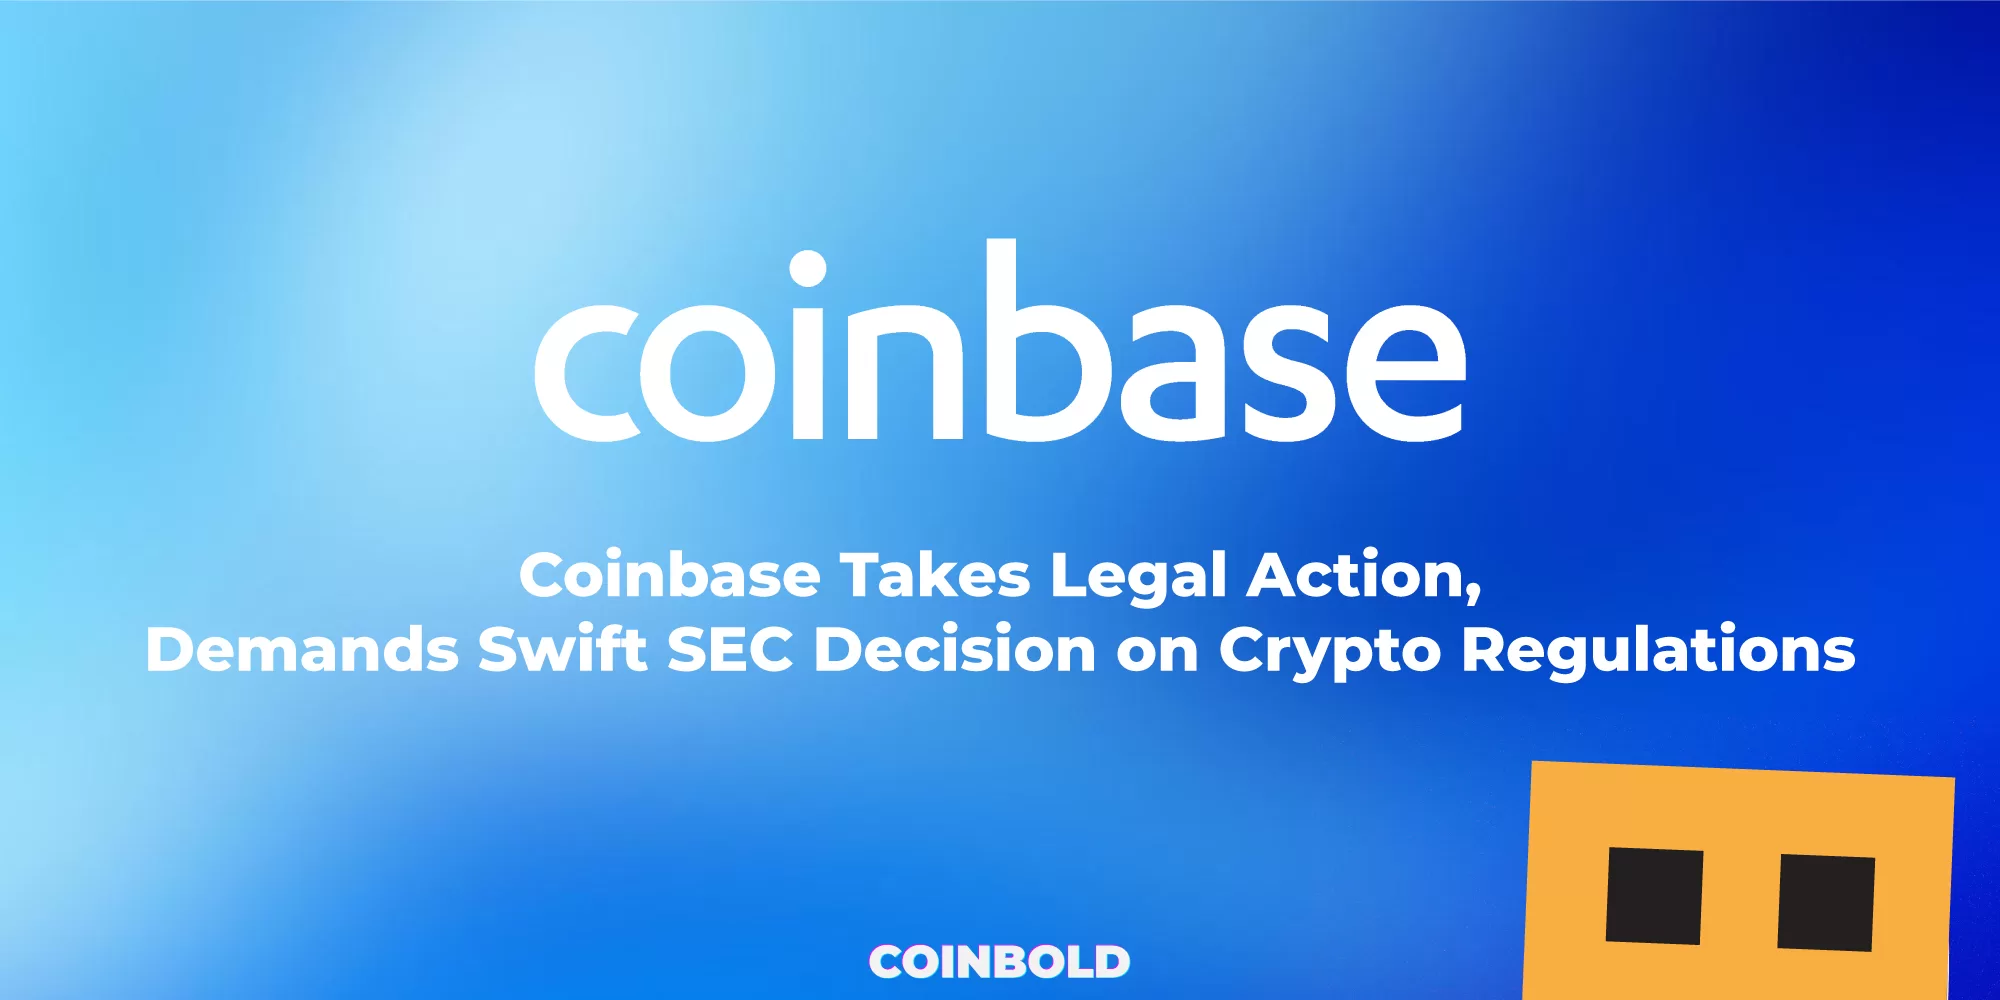 Coinbase Takes Legal Action, Demands Swift SEC Decision on Crypto Regulations